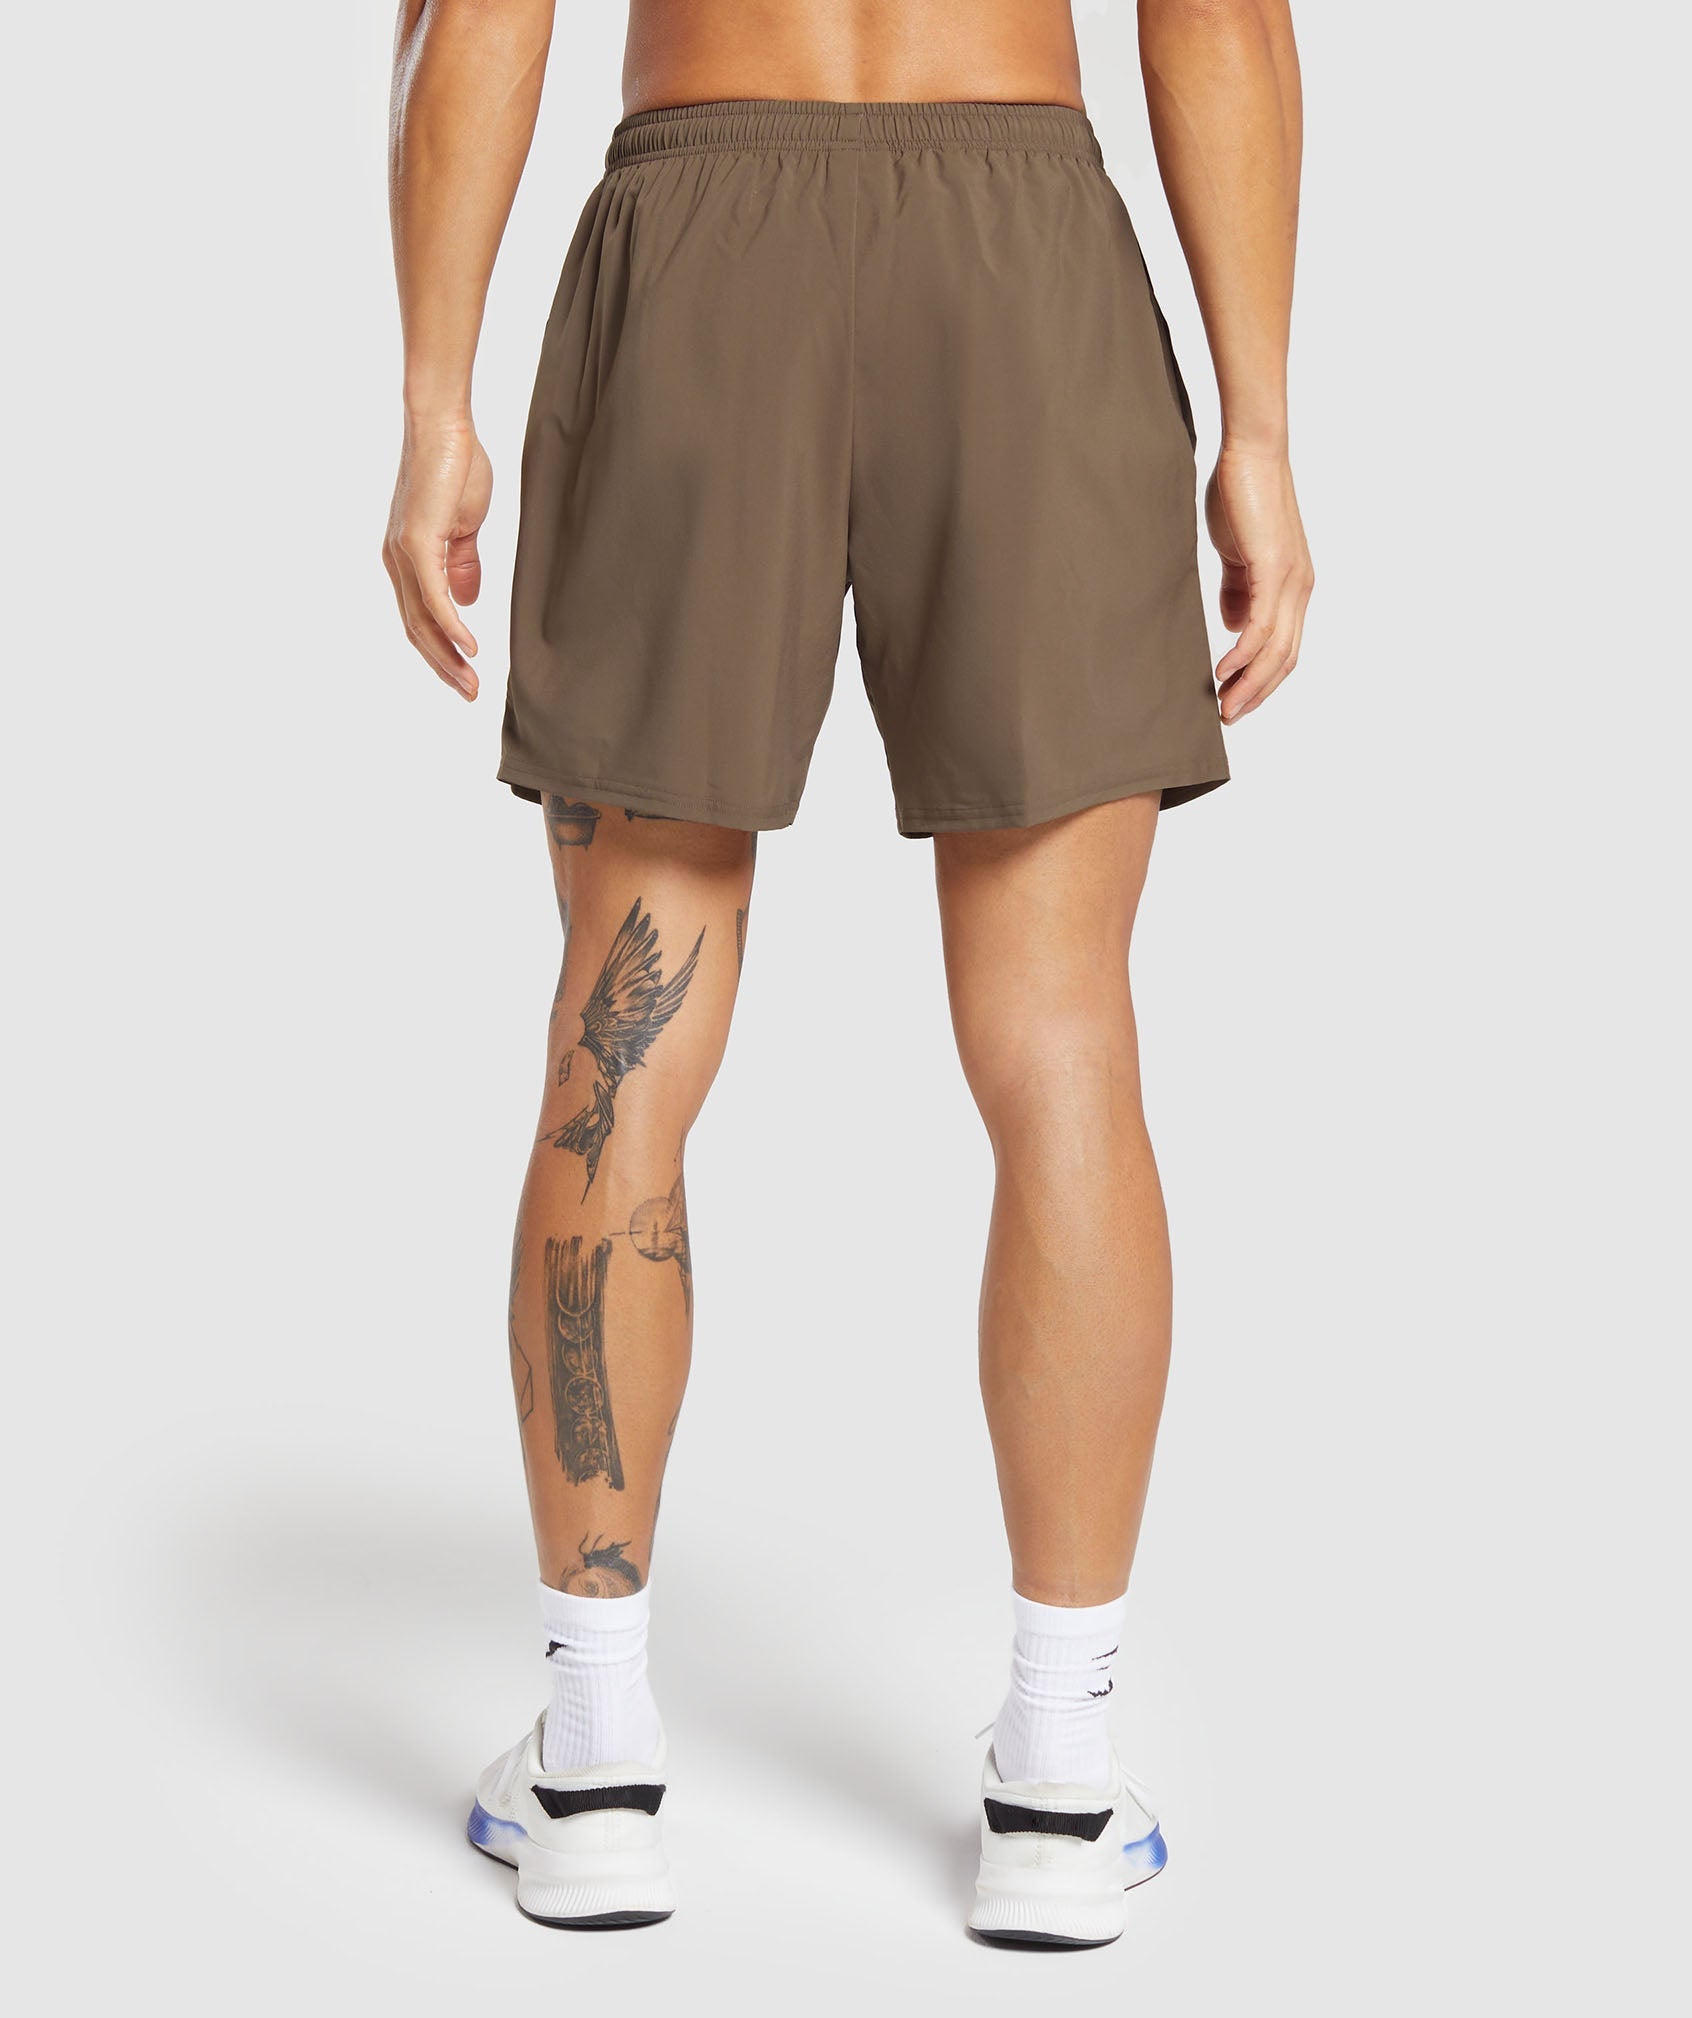 Hybrid Wellness 7" Shorts in Penny Brown - view 2